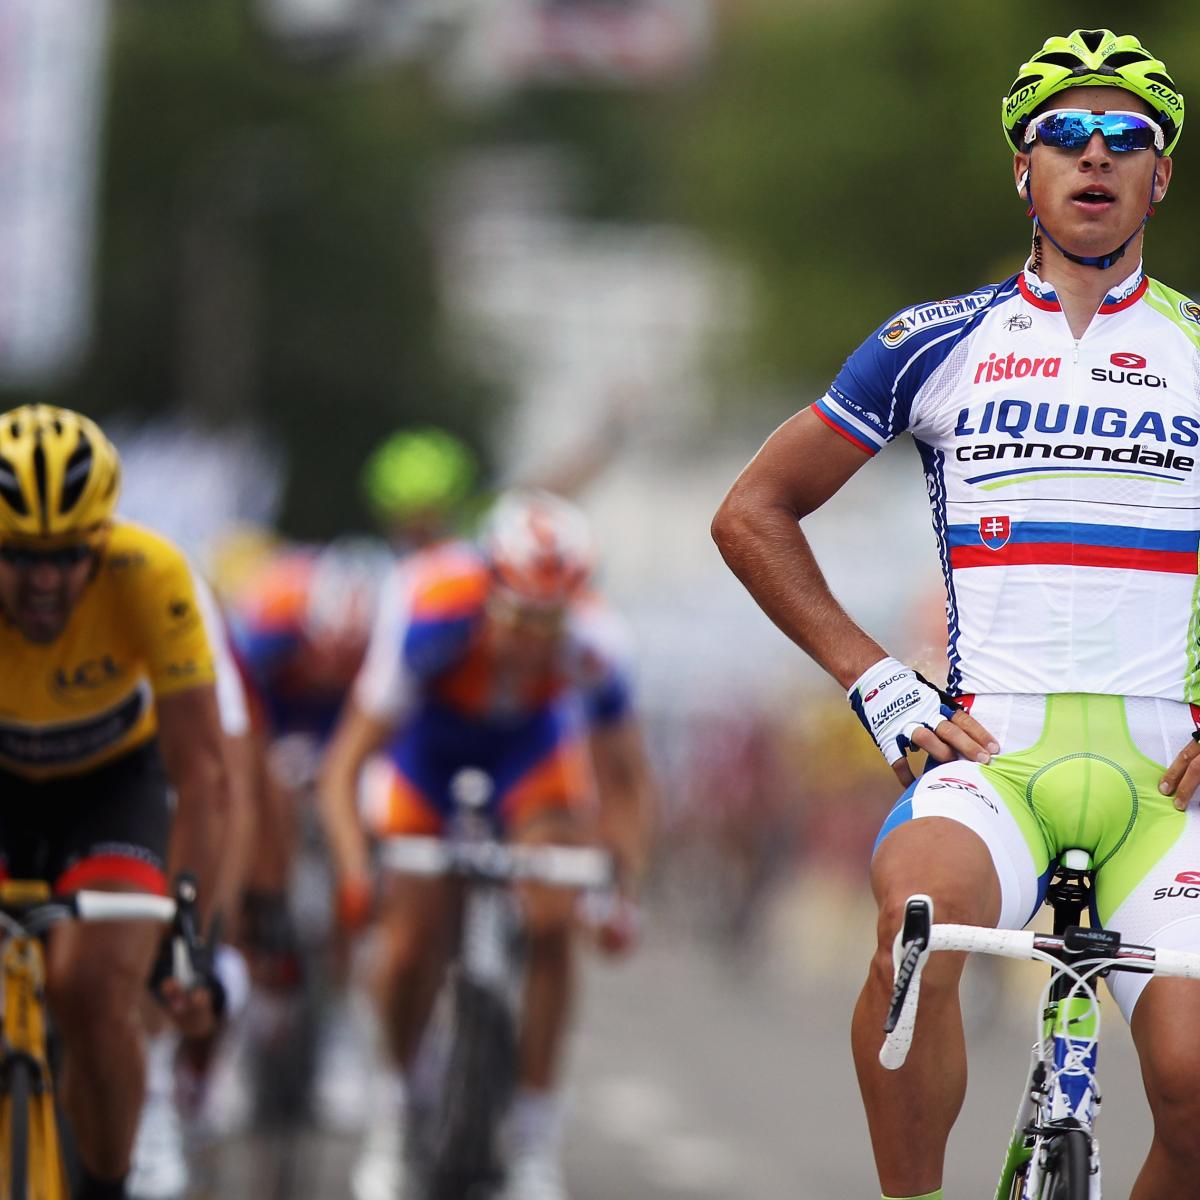 Tour de France 2012 Stage 1 Results: Winner, Leaderboard and Highlights ...